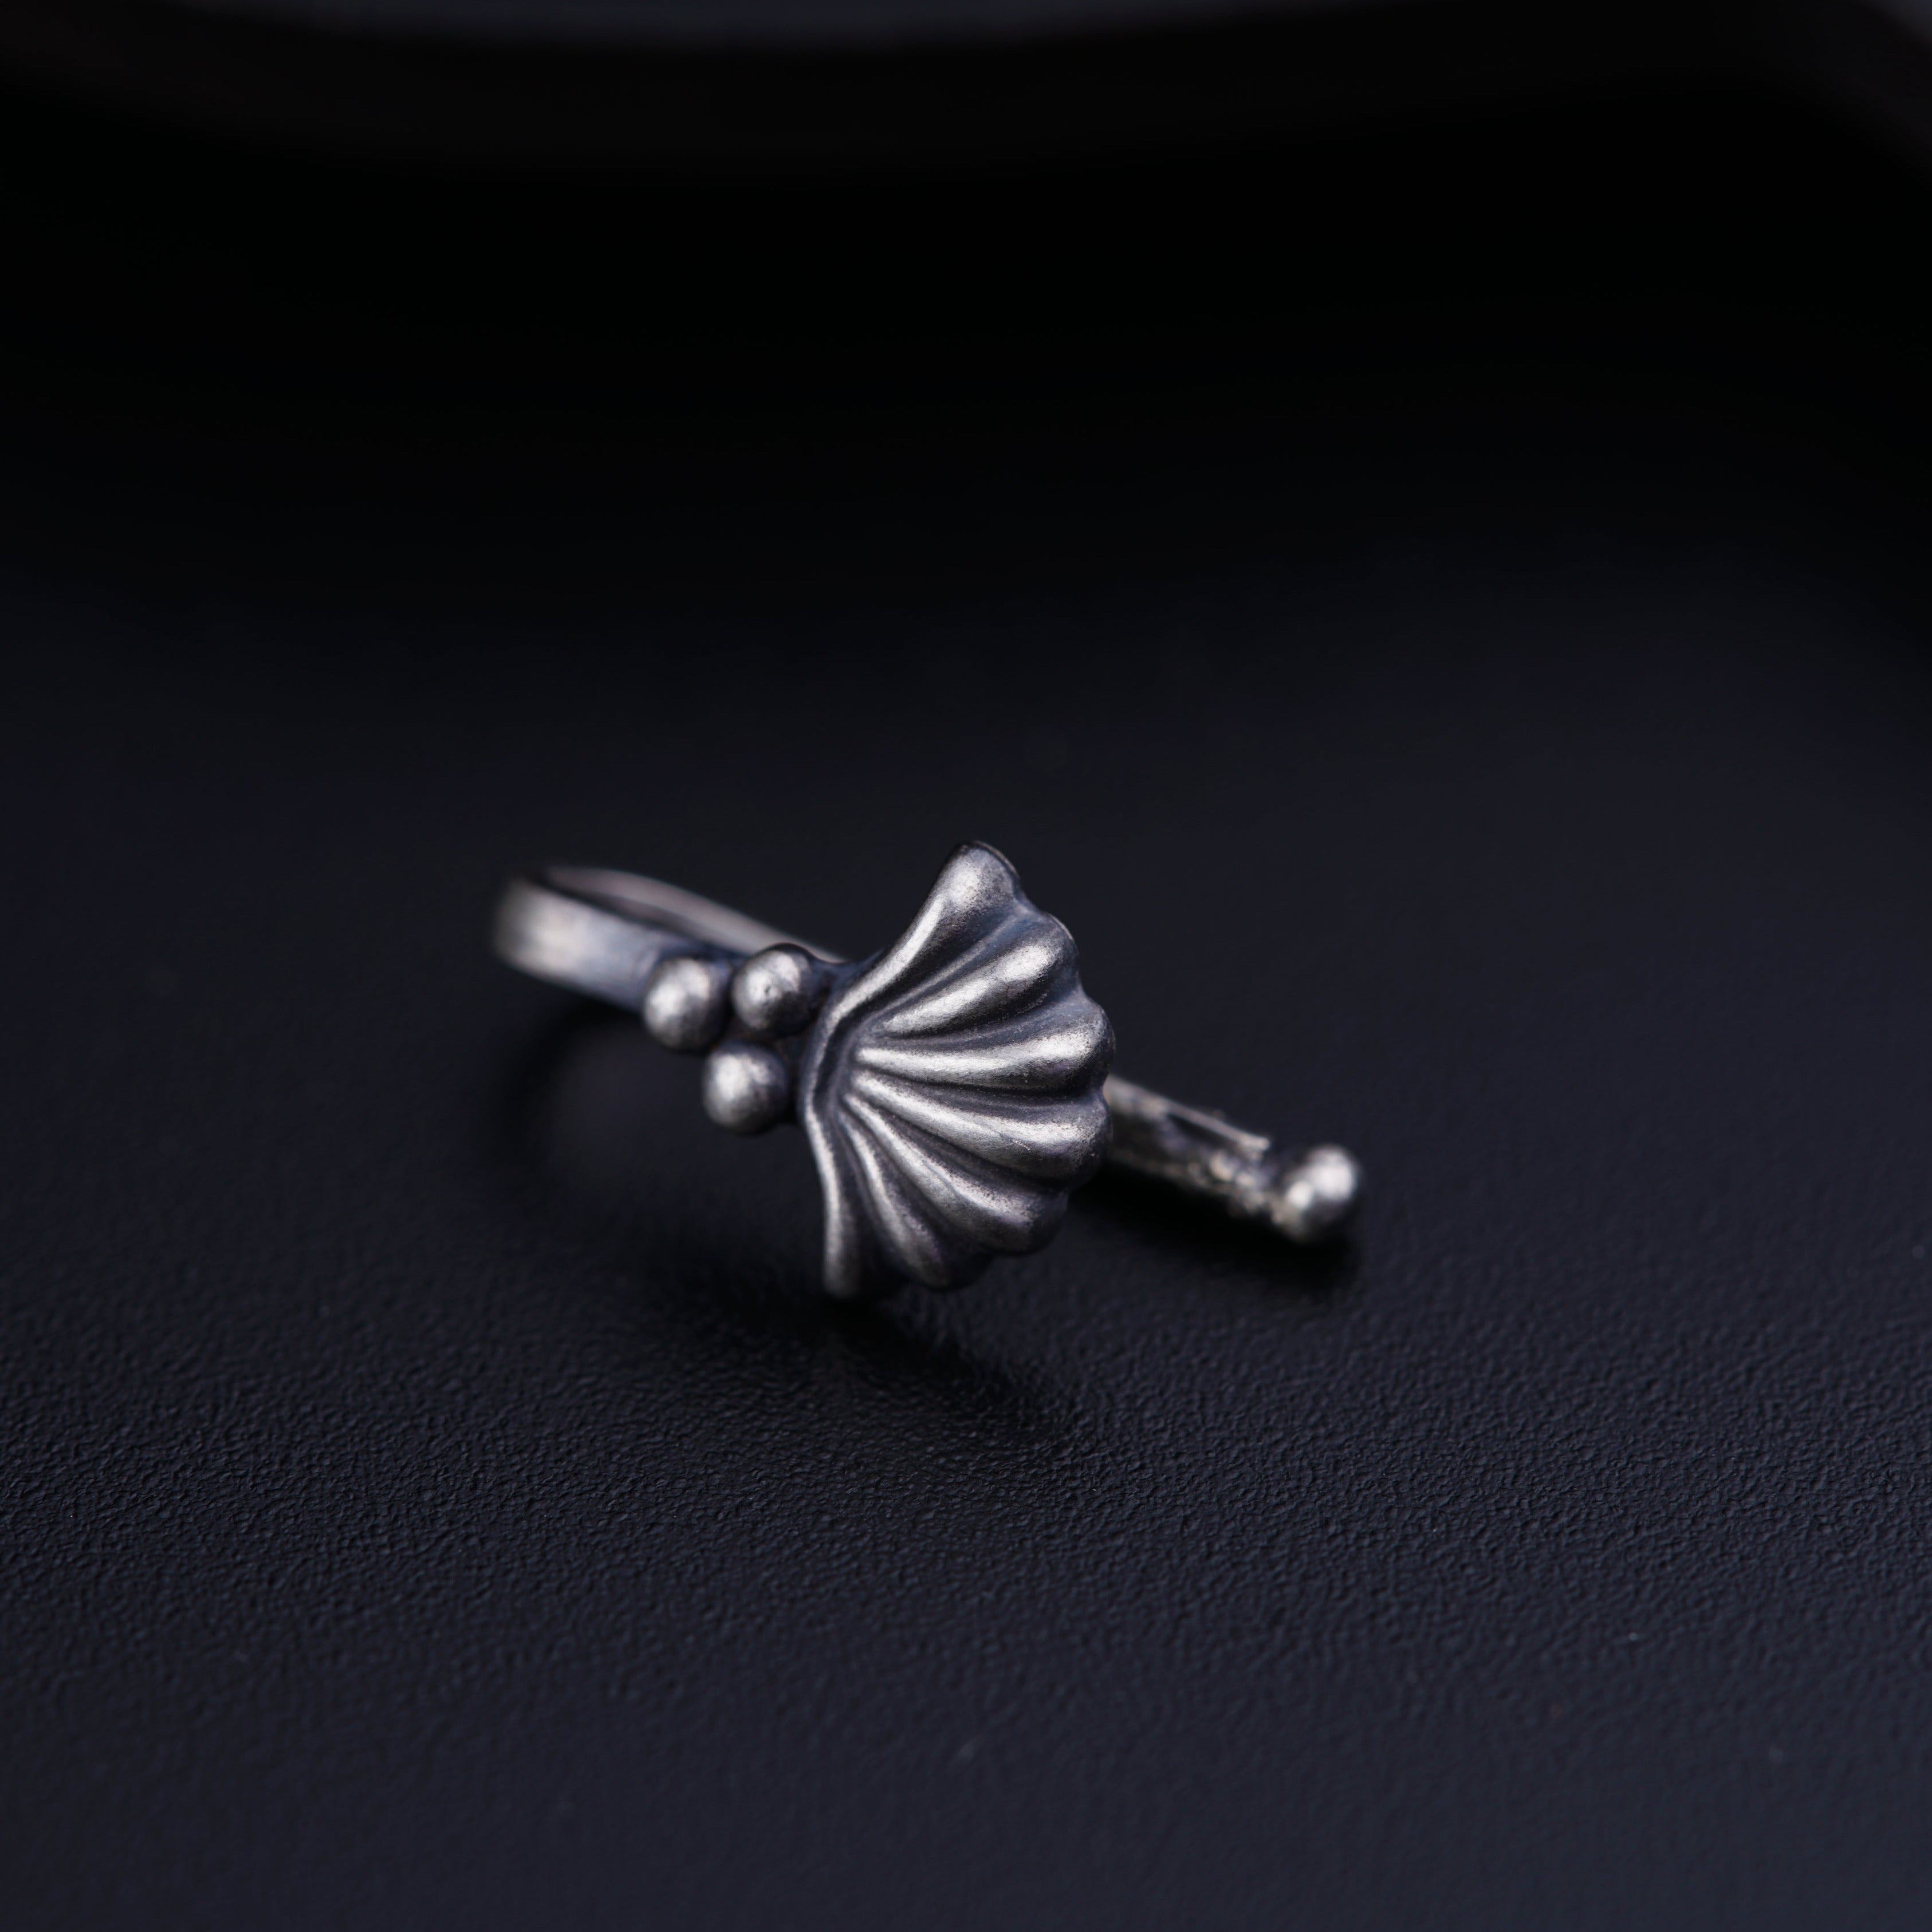 Shell Nose pin (Clip On)